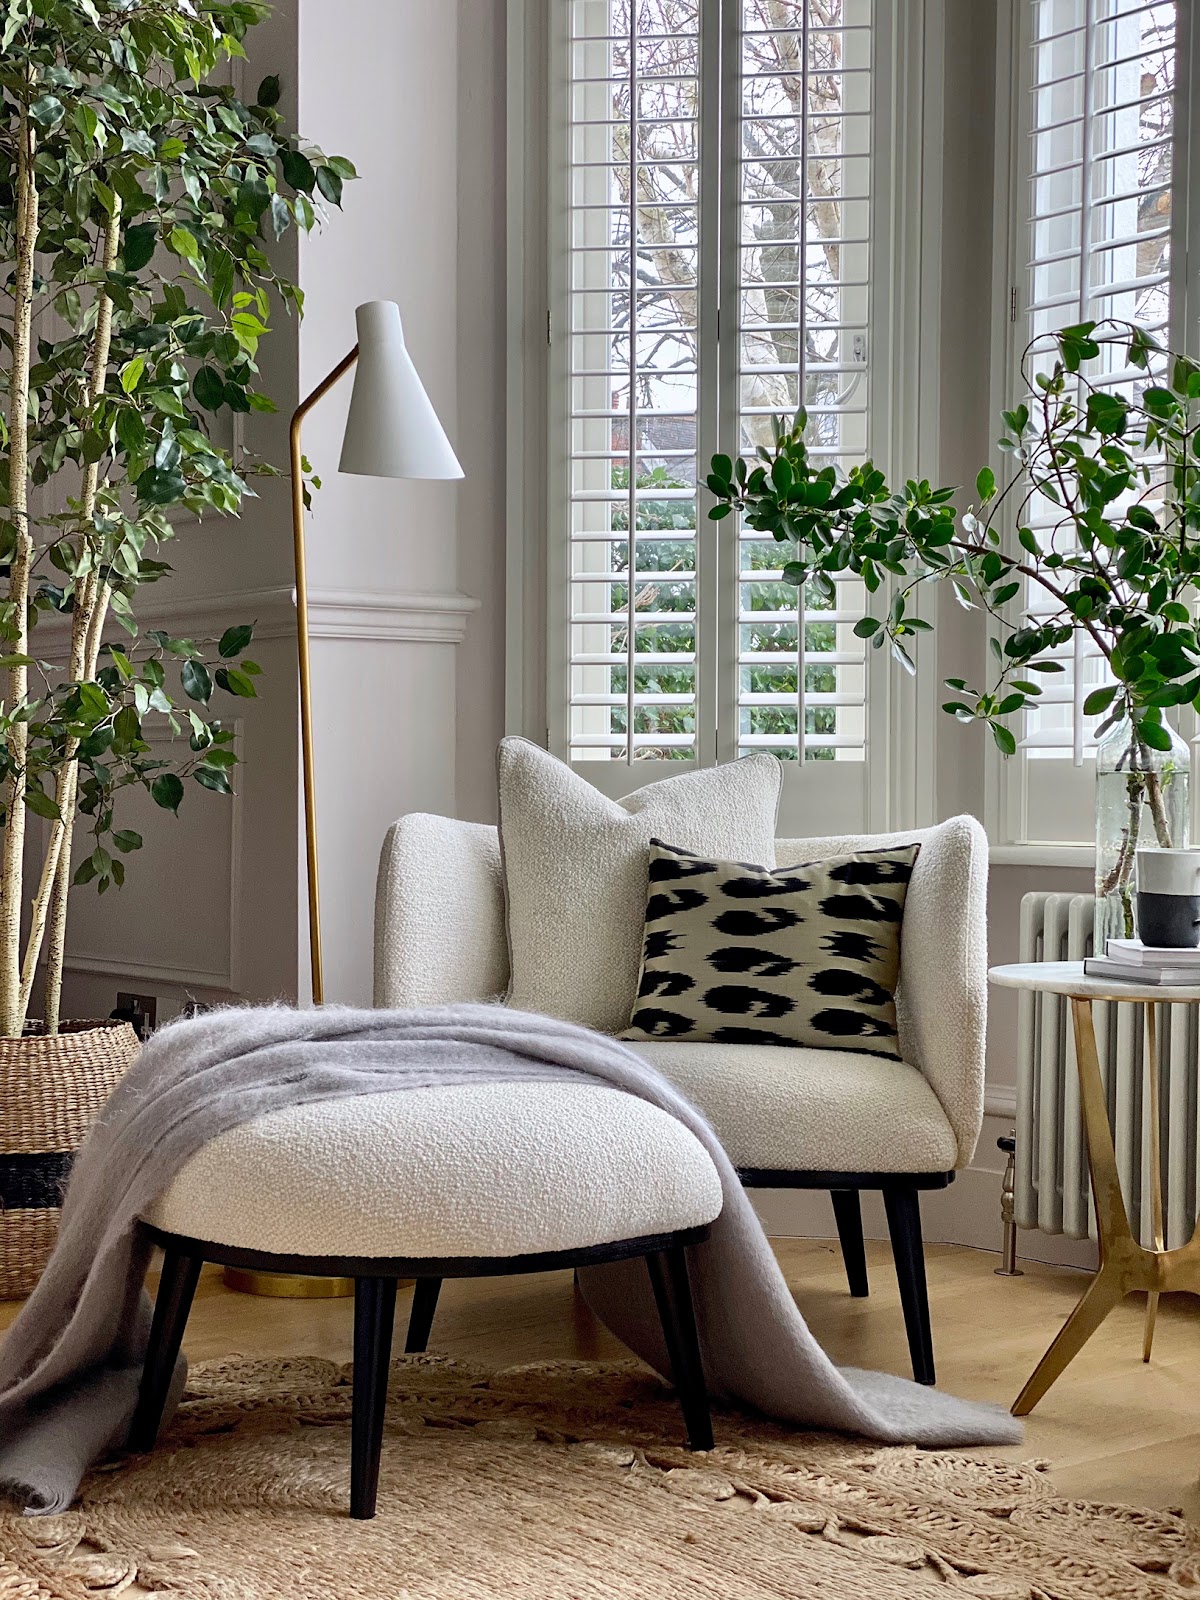 How to Style a Beautiful Bay Window | Love Your Home